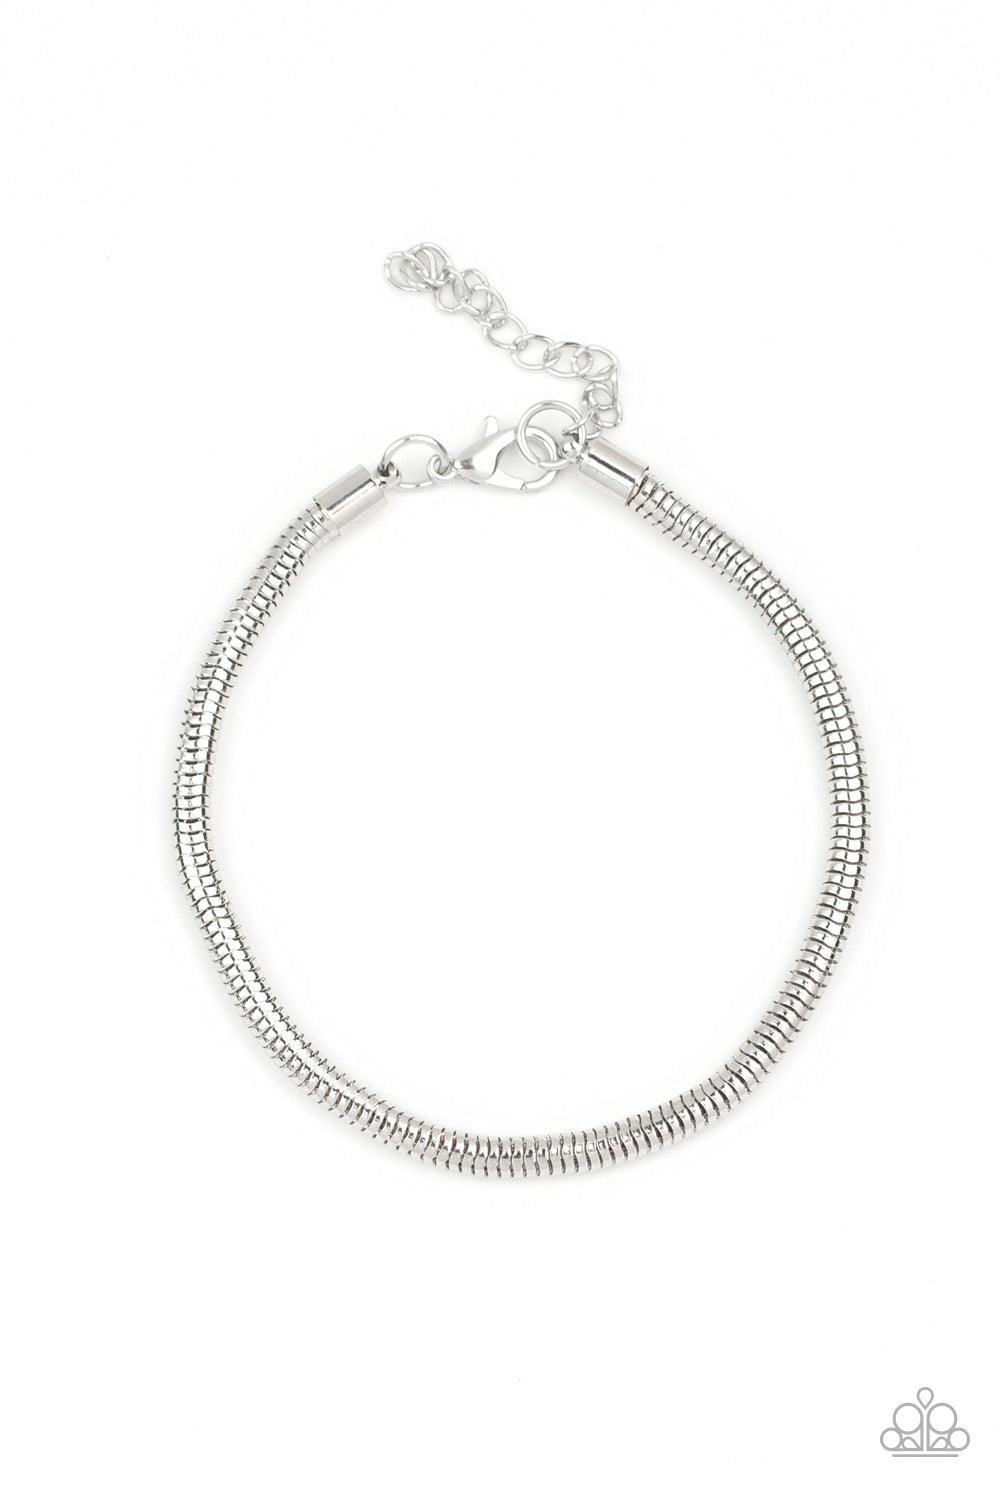 Paparazzi Accessories Winning - Silver Brushed in a high-sheen shimmer, a rounded silver snake chain links around the wrist for a sleek look. Features an adjustable clasp closure. Jewelry